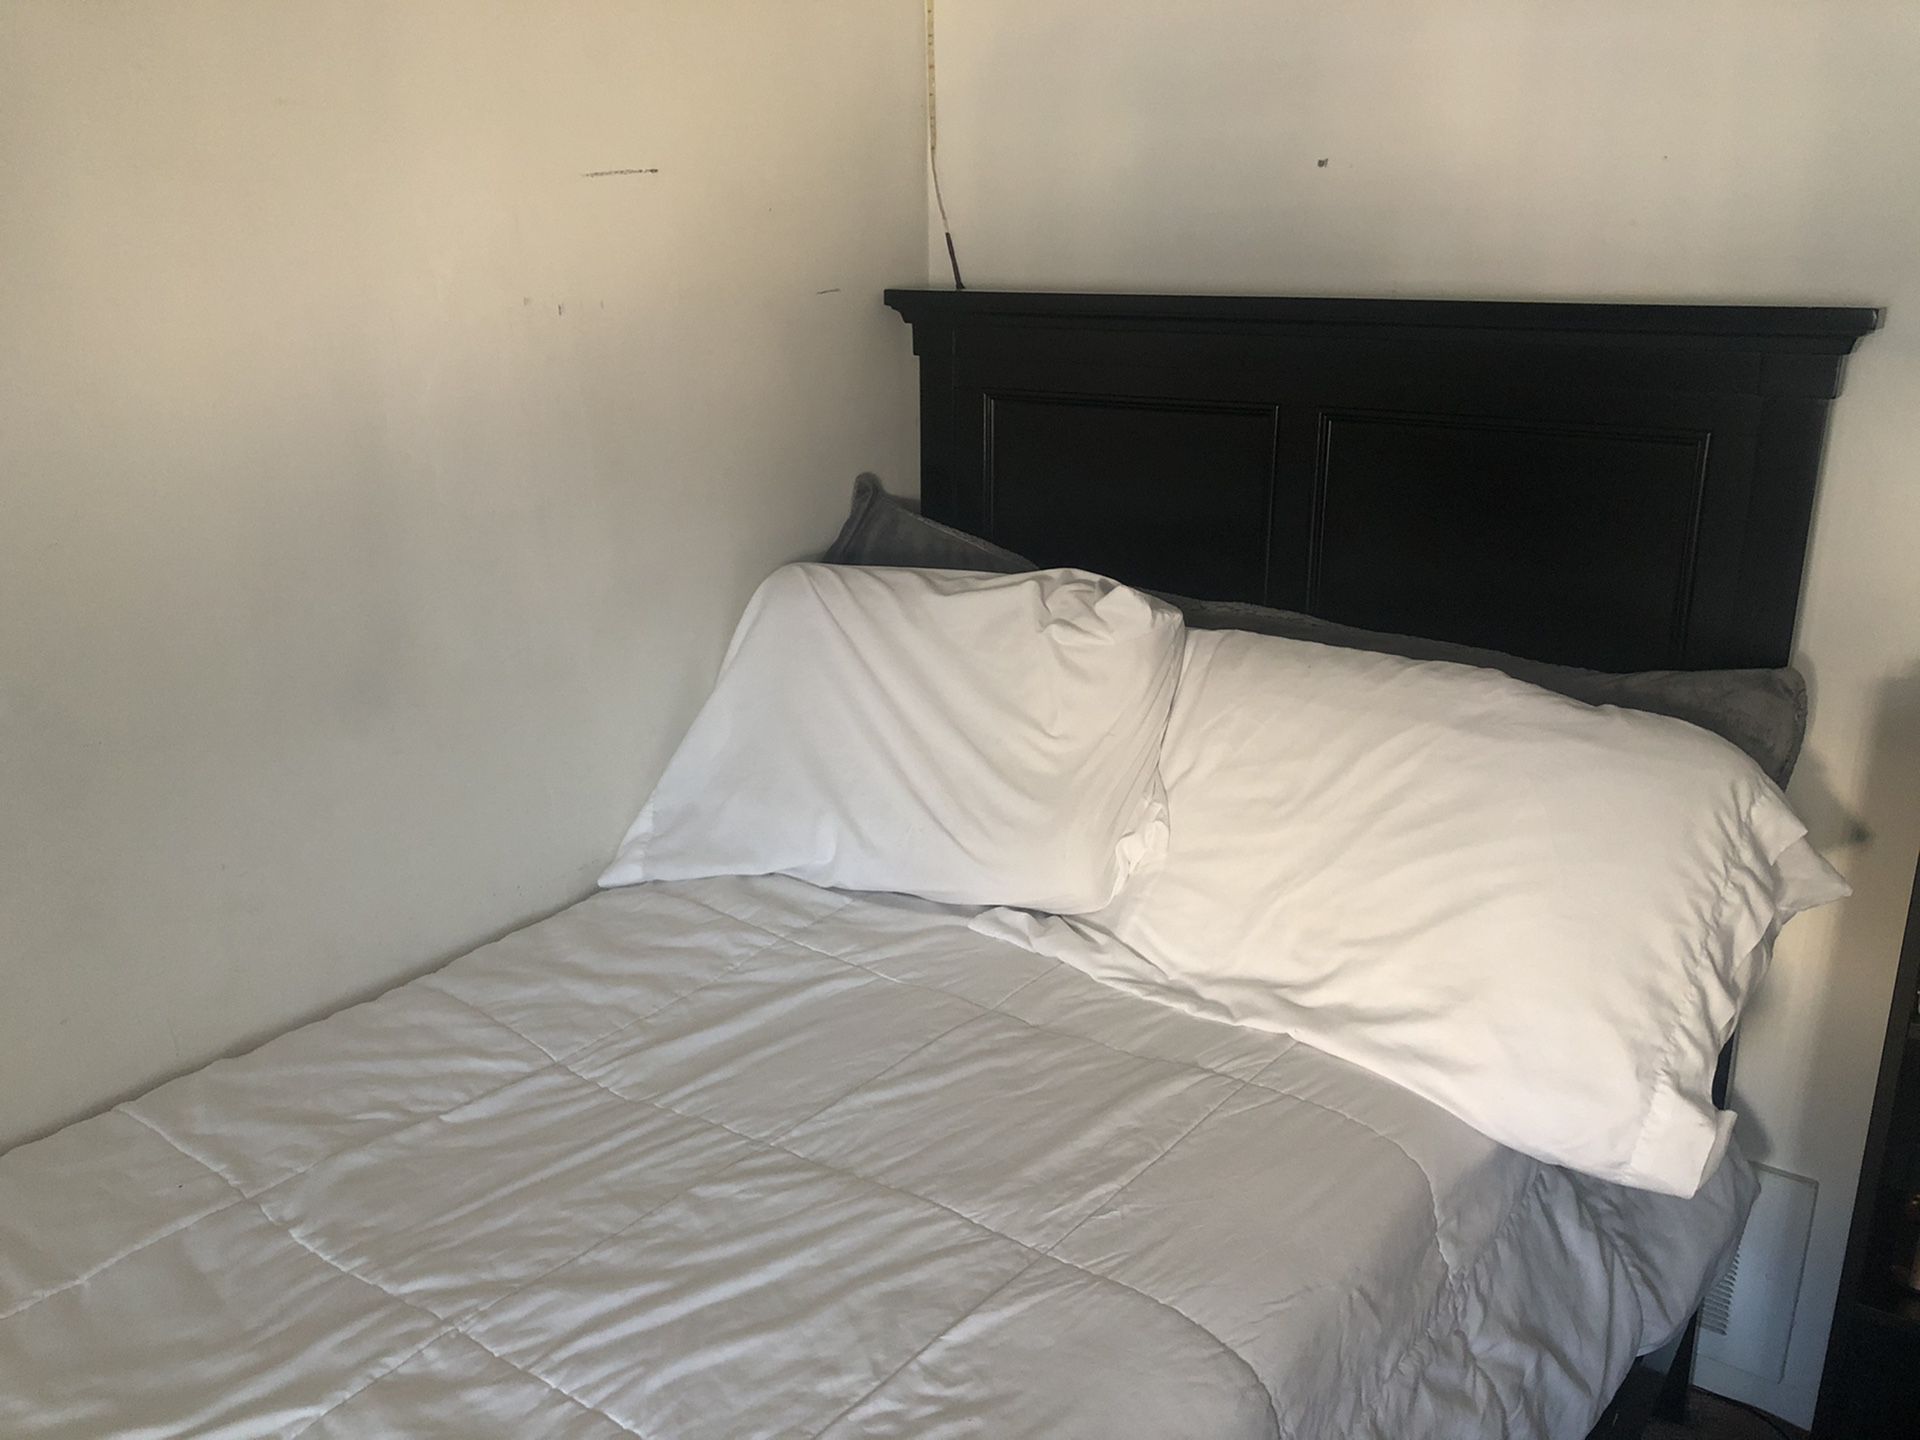 Twin Bed For Sale